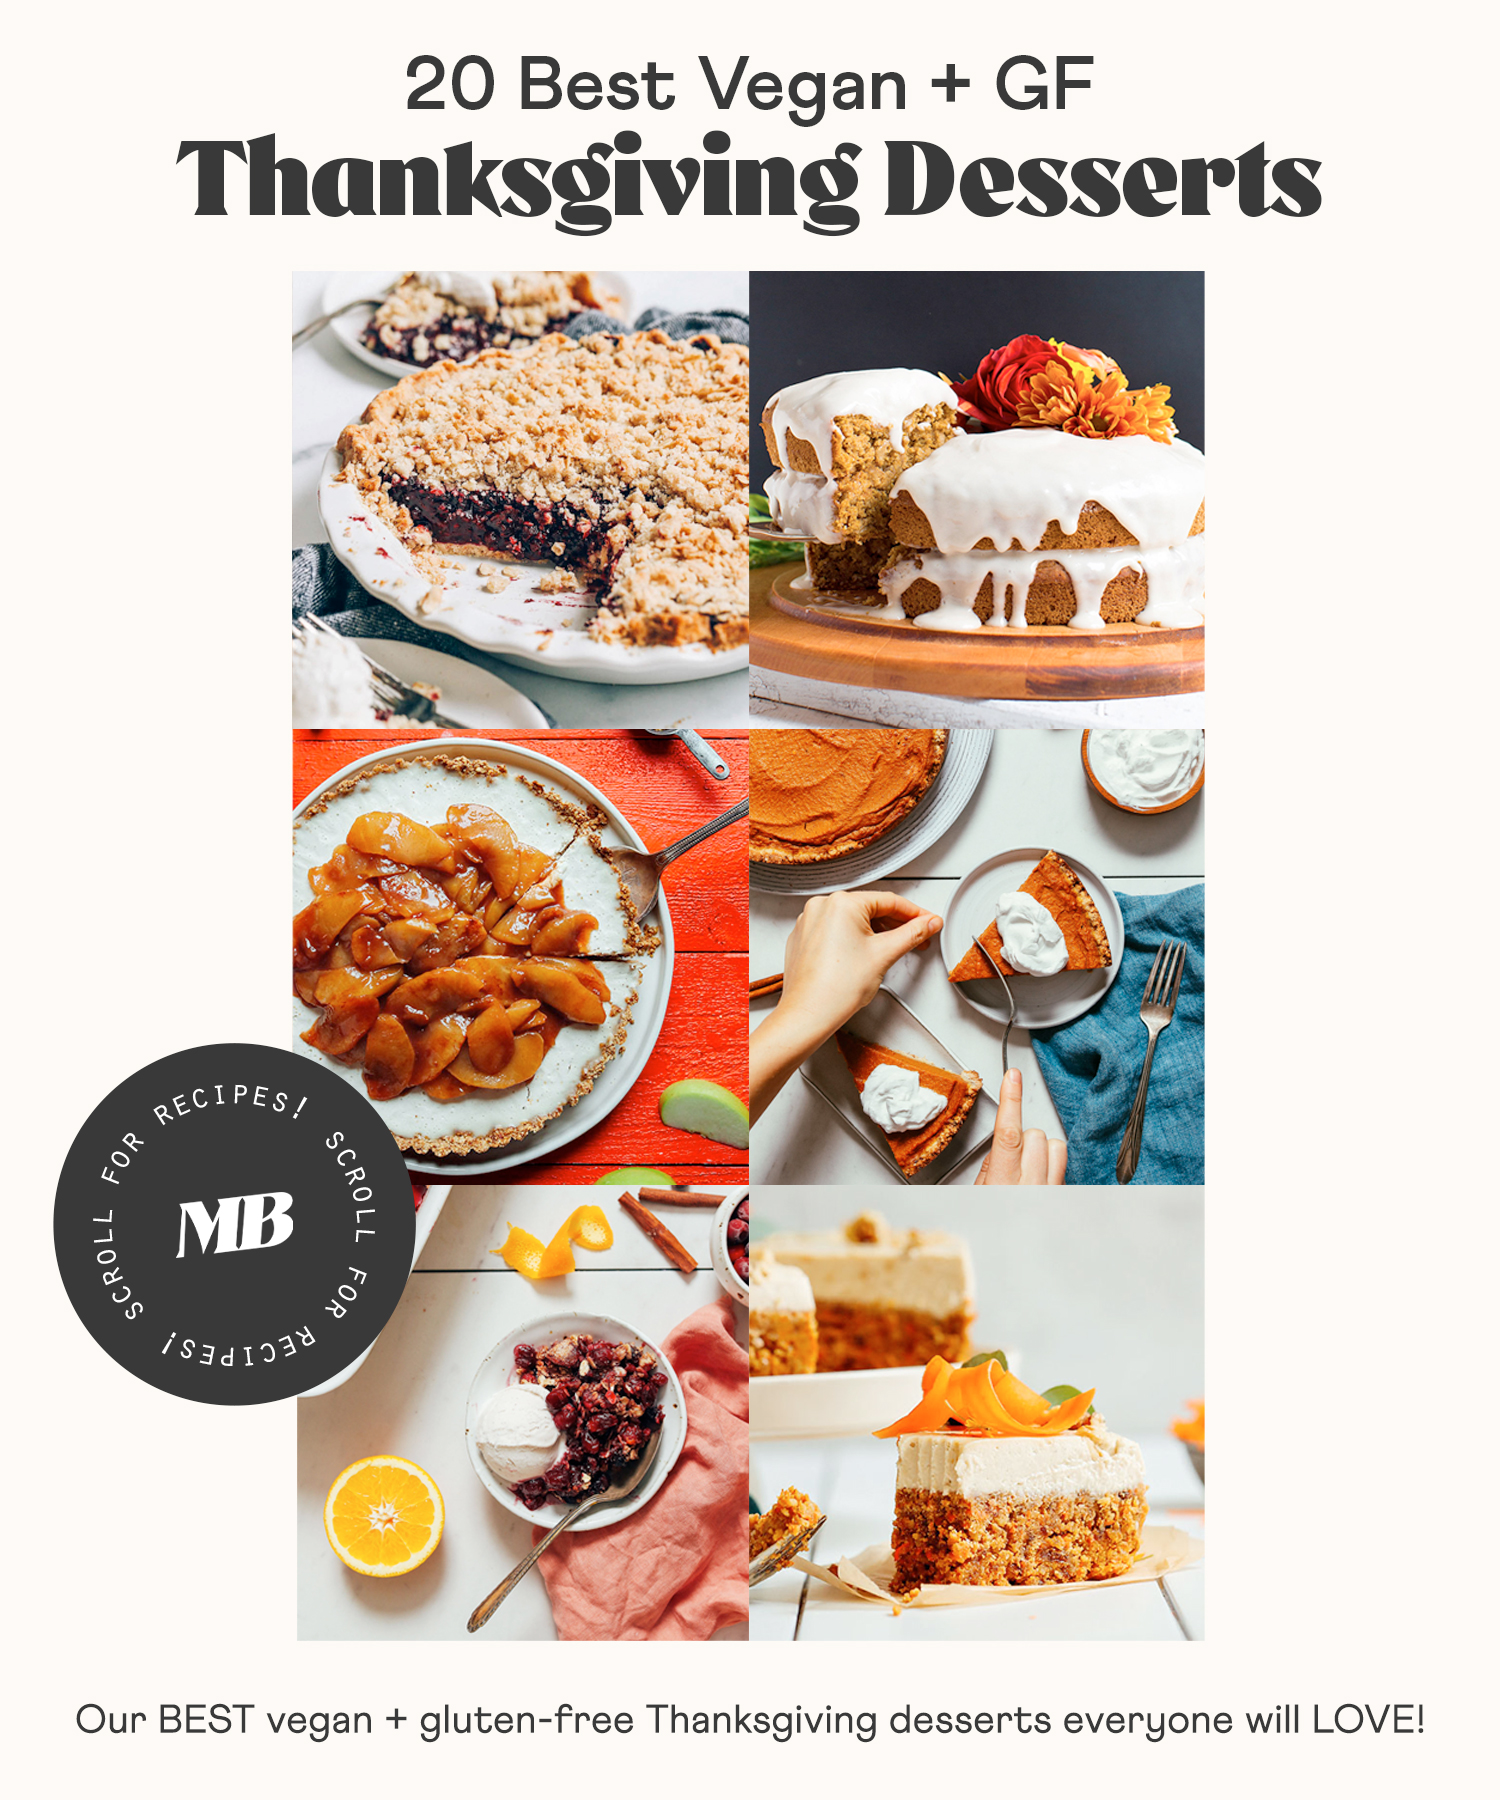 Assortment of pies, crisps, cakes, and other vegan gluten-free Thanksgiving desserts